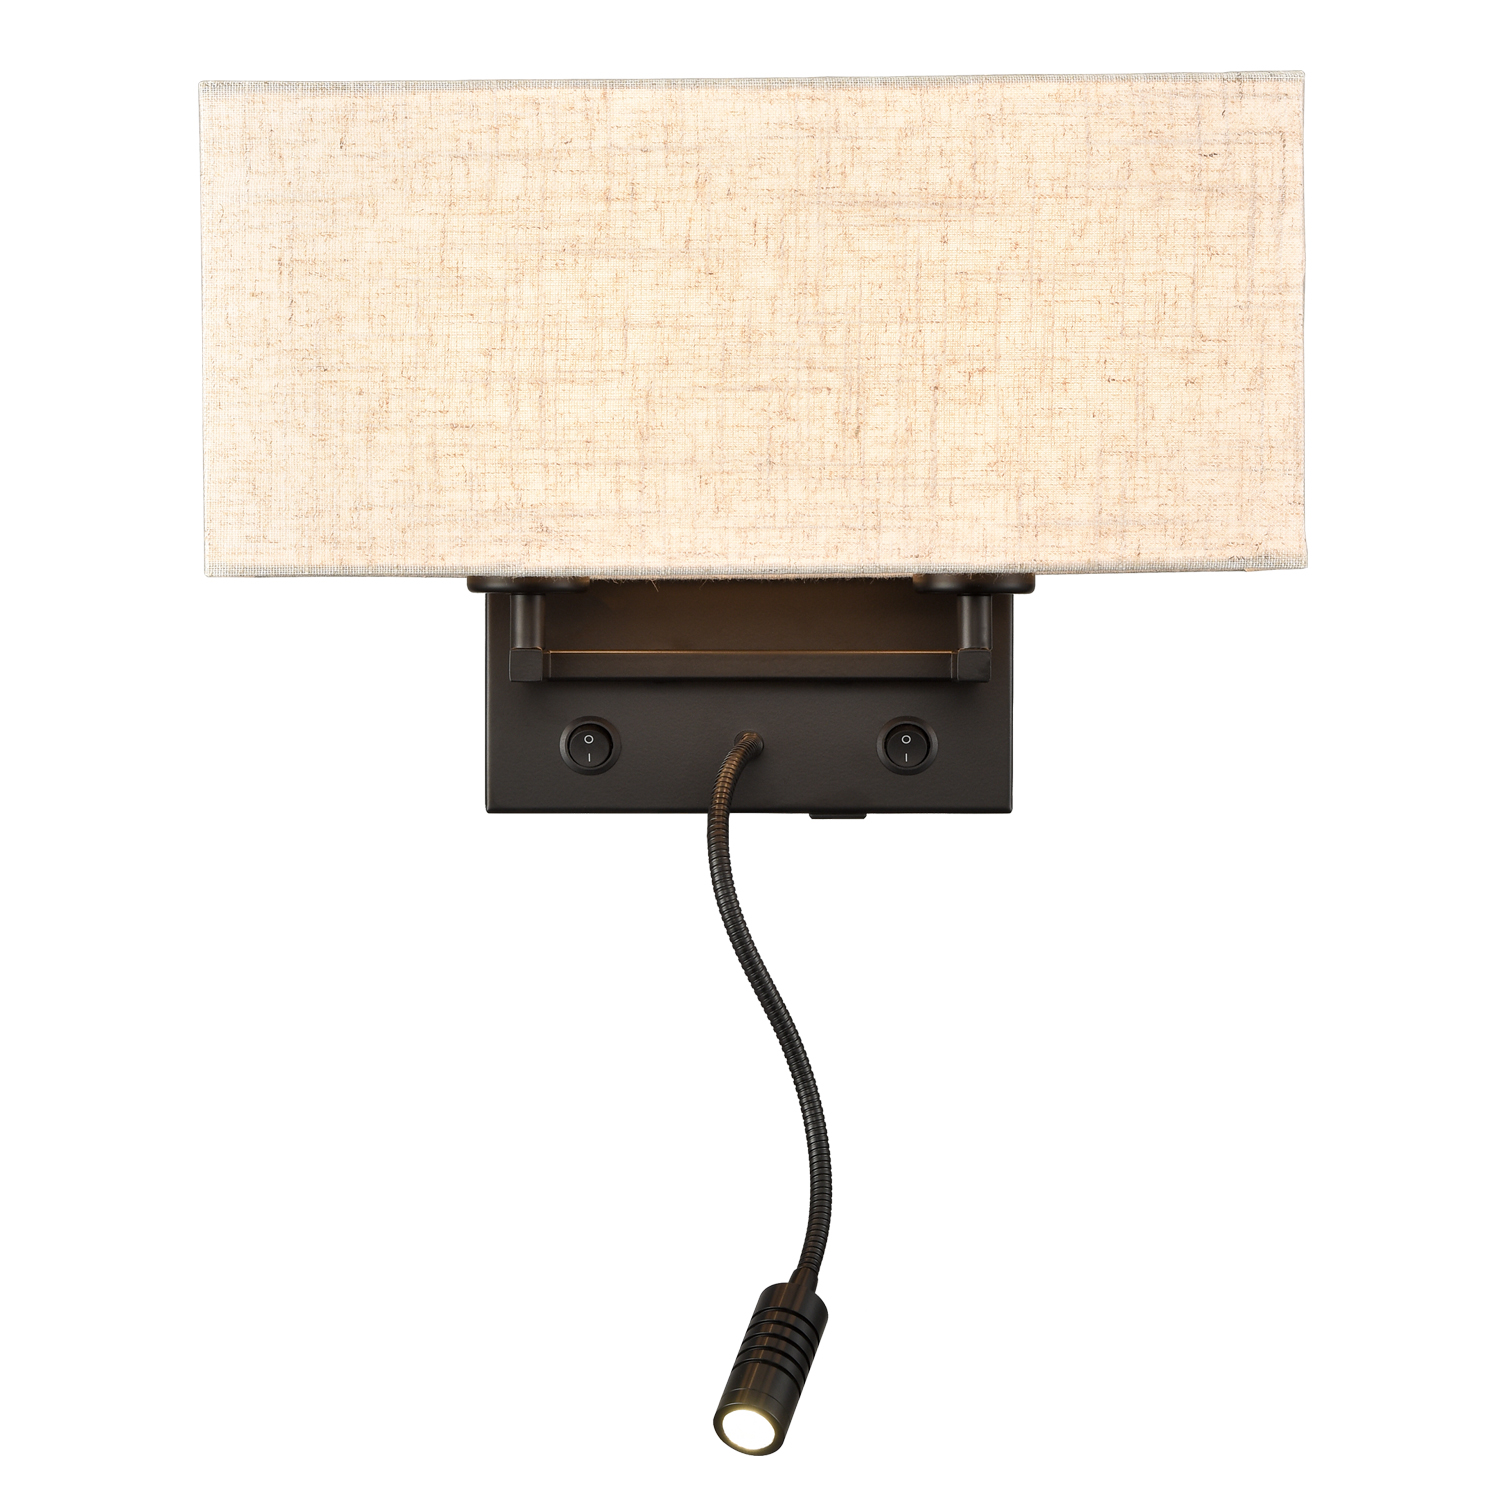 Black Wall Mounted Bedside Lamps with Switch USB Ports and LED Reading Spotlight Wall Focus Light